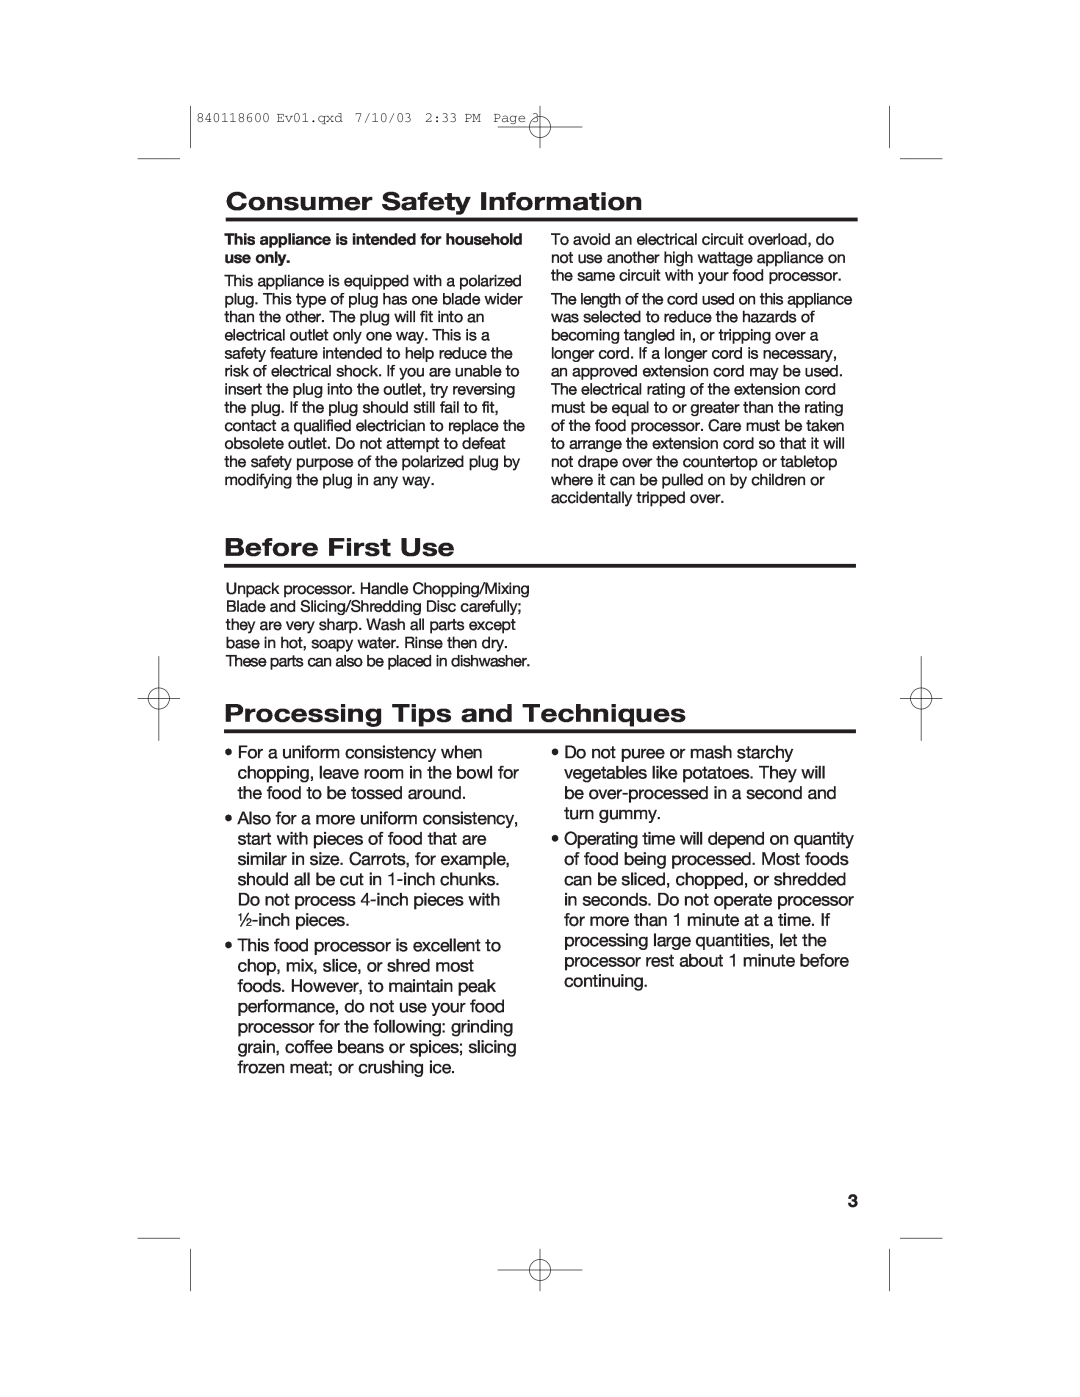 Hamilton Beach 70550RC manual Consumer Safety Information, Before First Use, Processing Tips and Techniques 